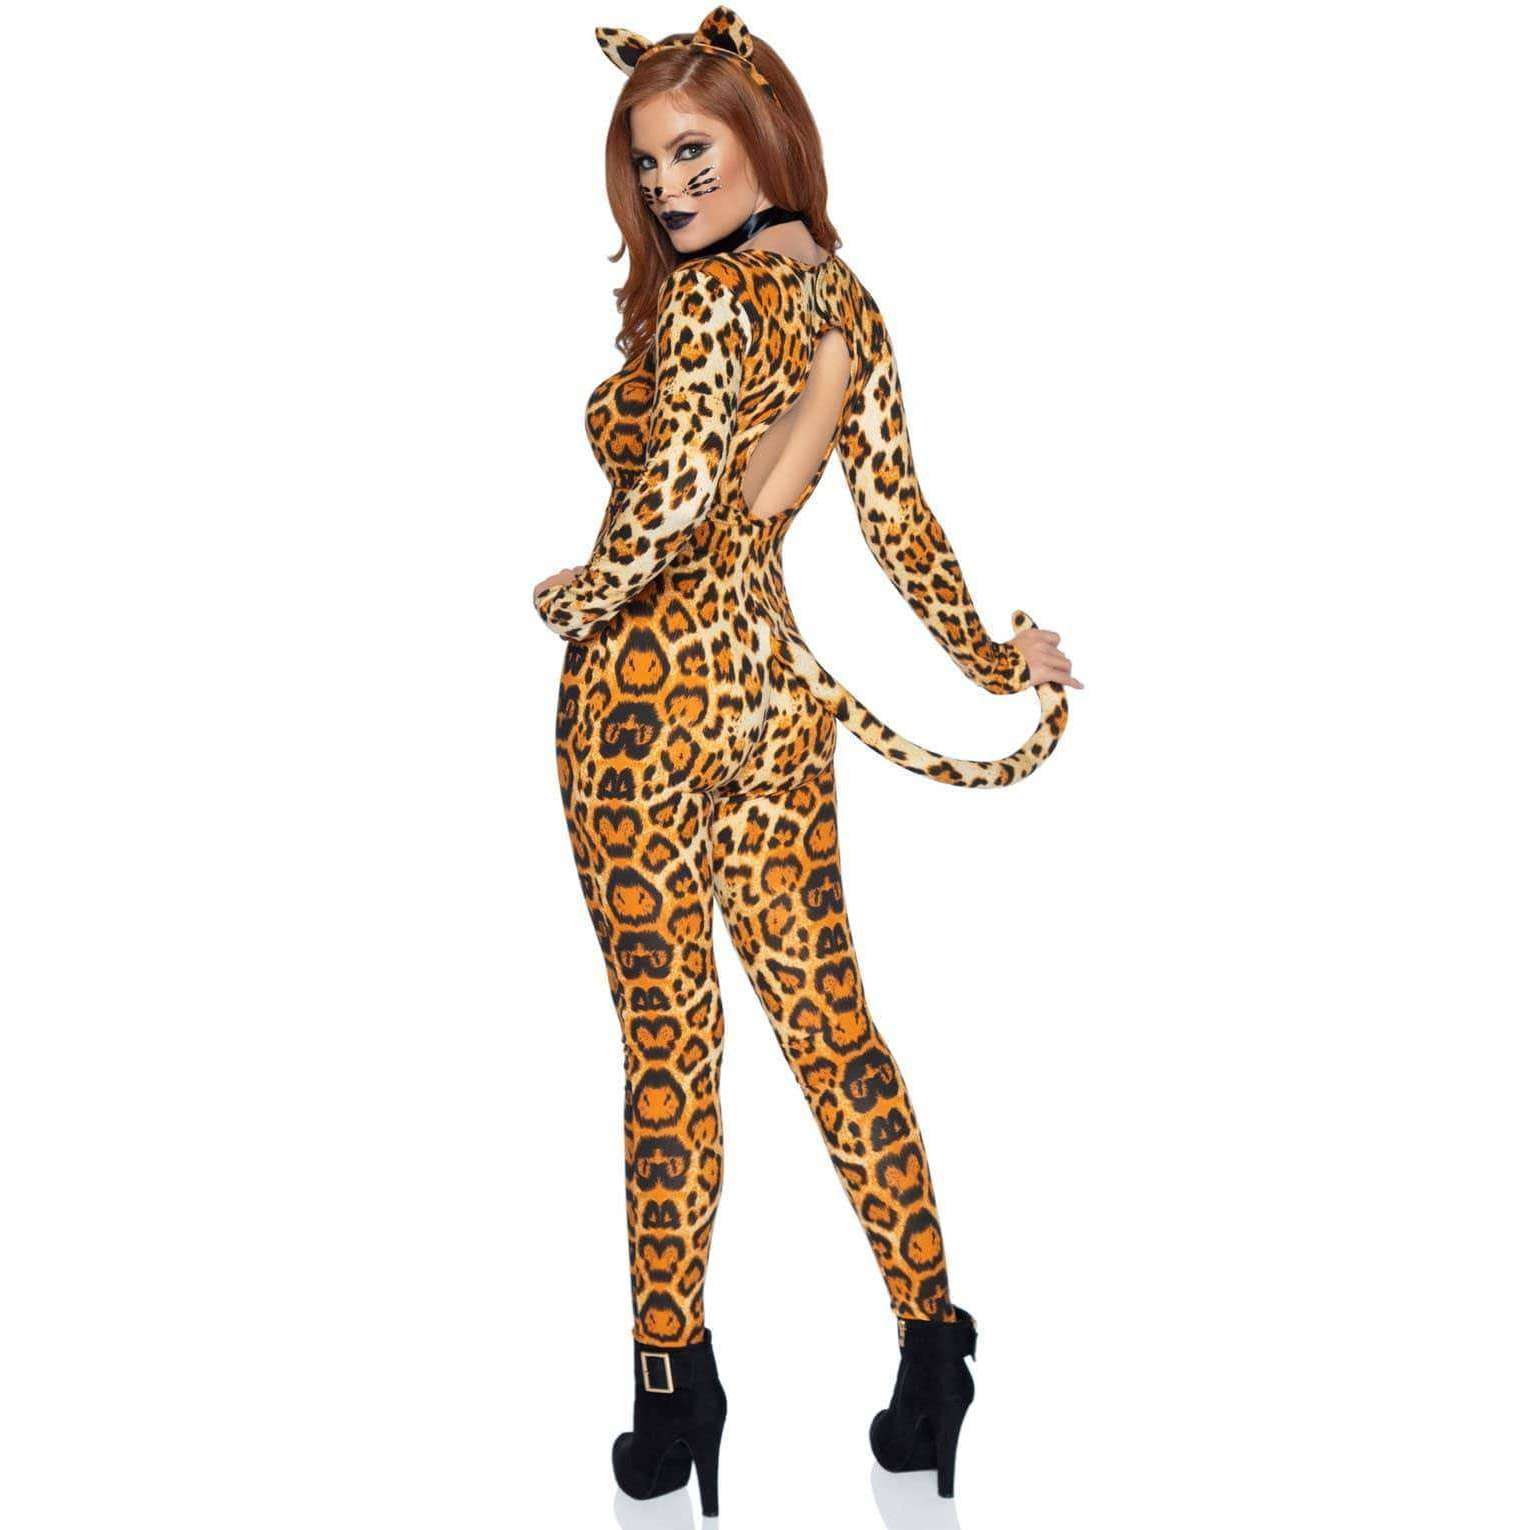 Sexy Cougar 3pc Bodysuit Adult Costume